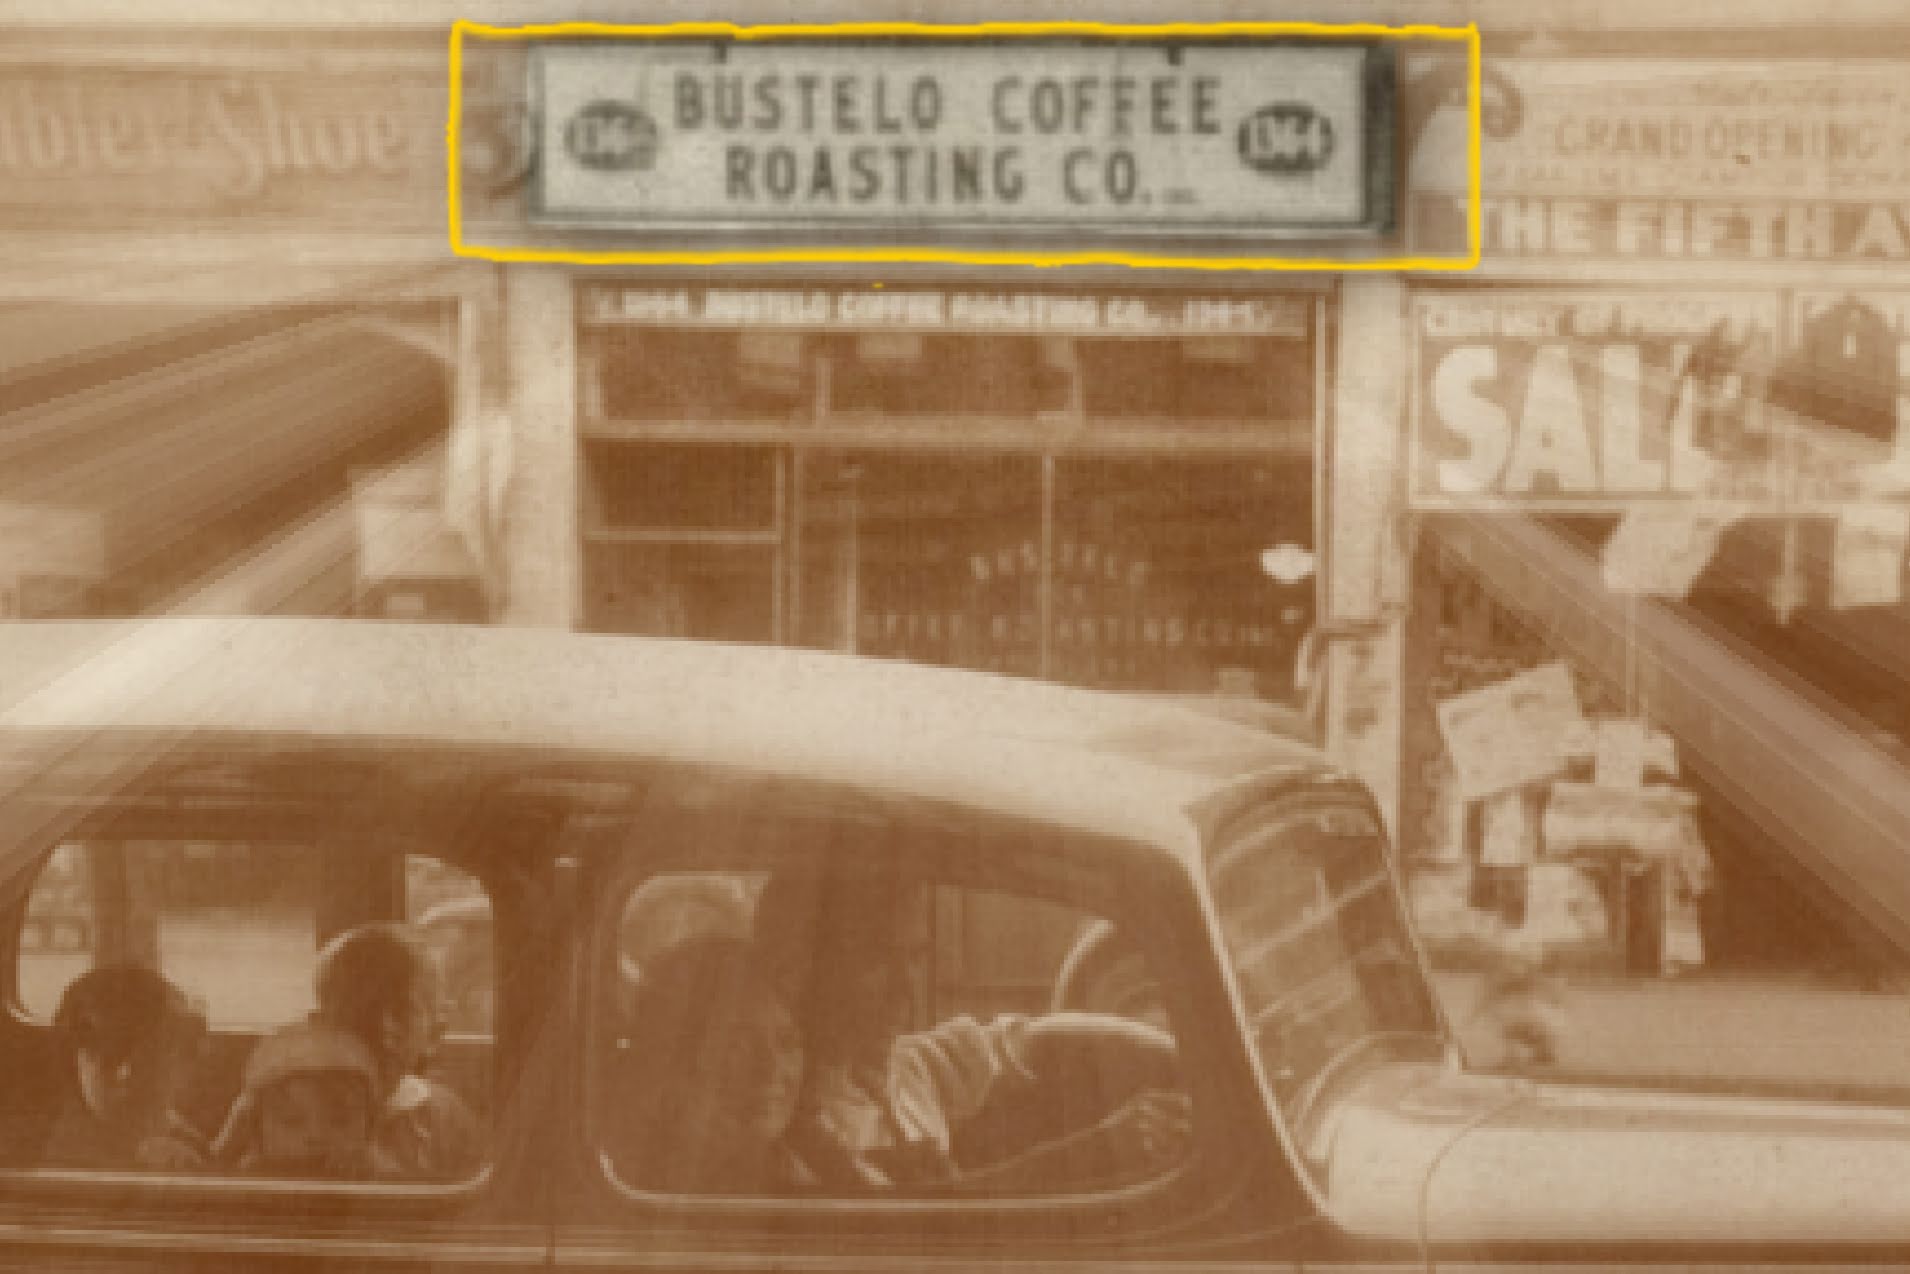 The First Café Bustelo Storefront Created a Sense of Community for Thousands of Latinos nuestro stories